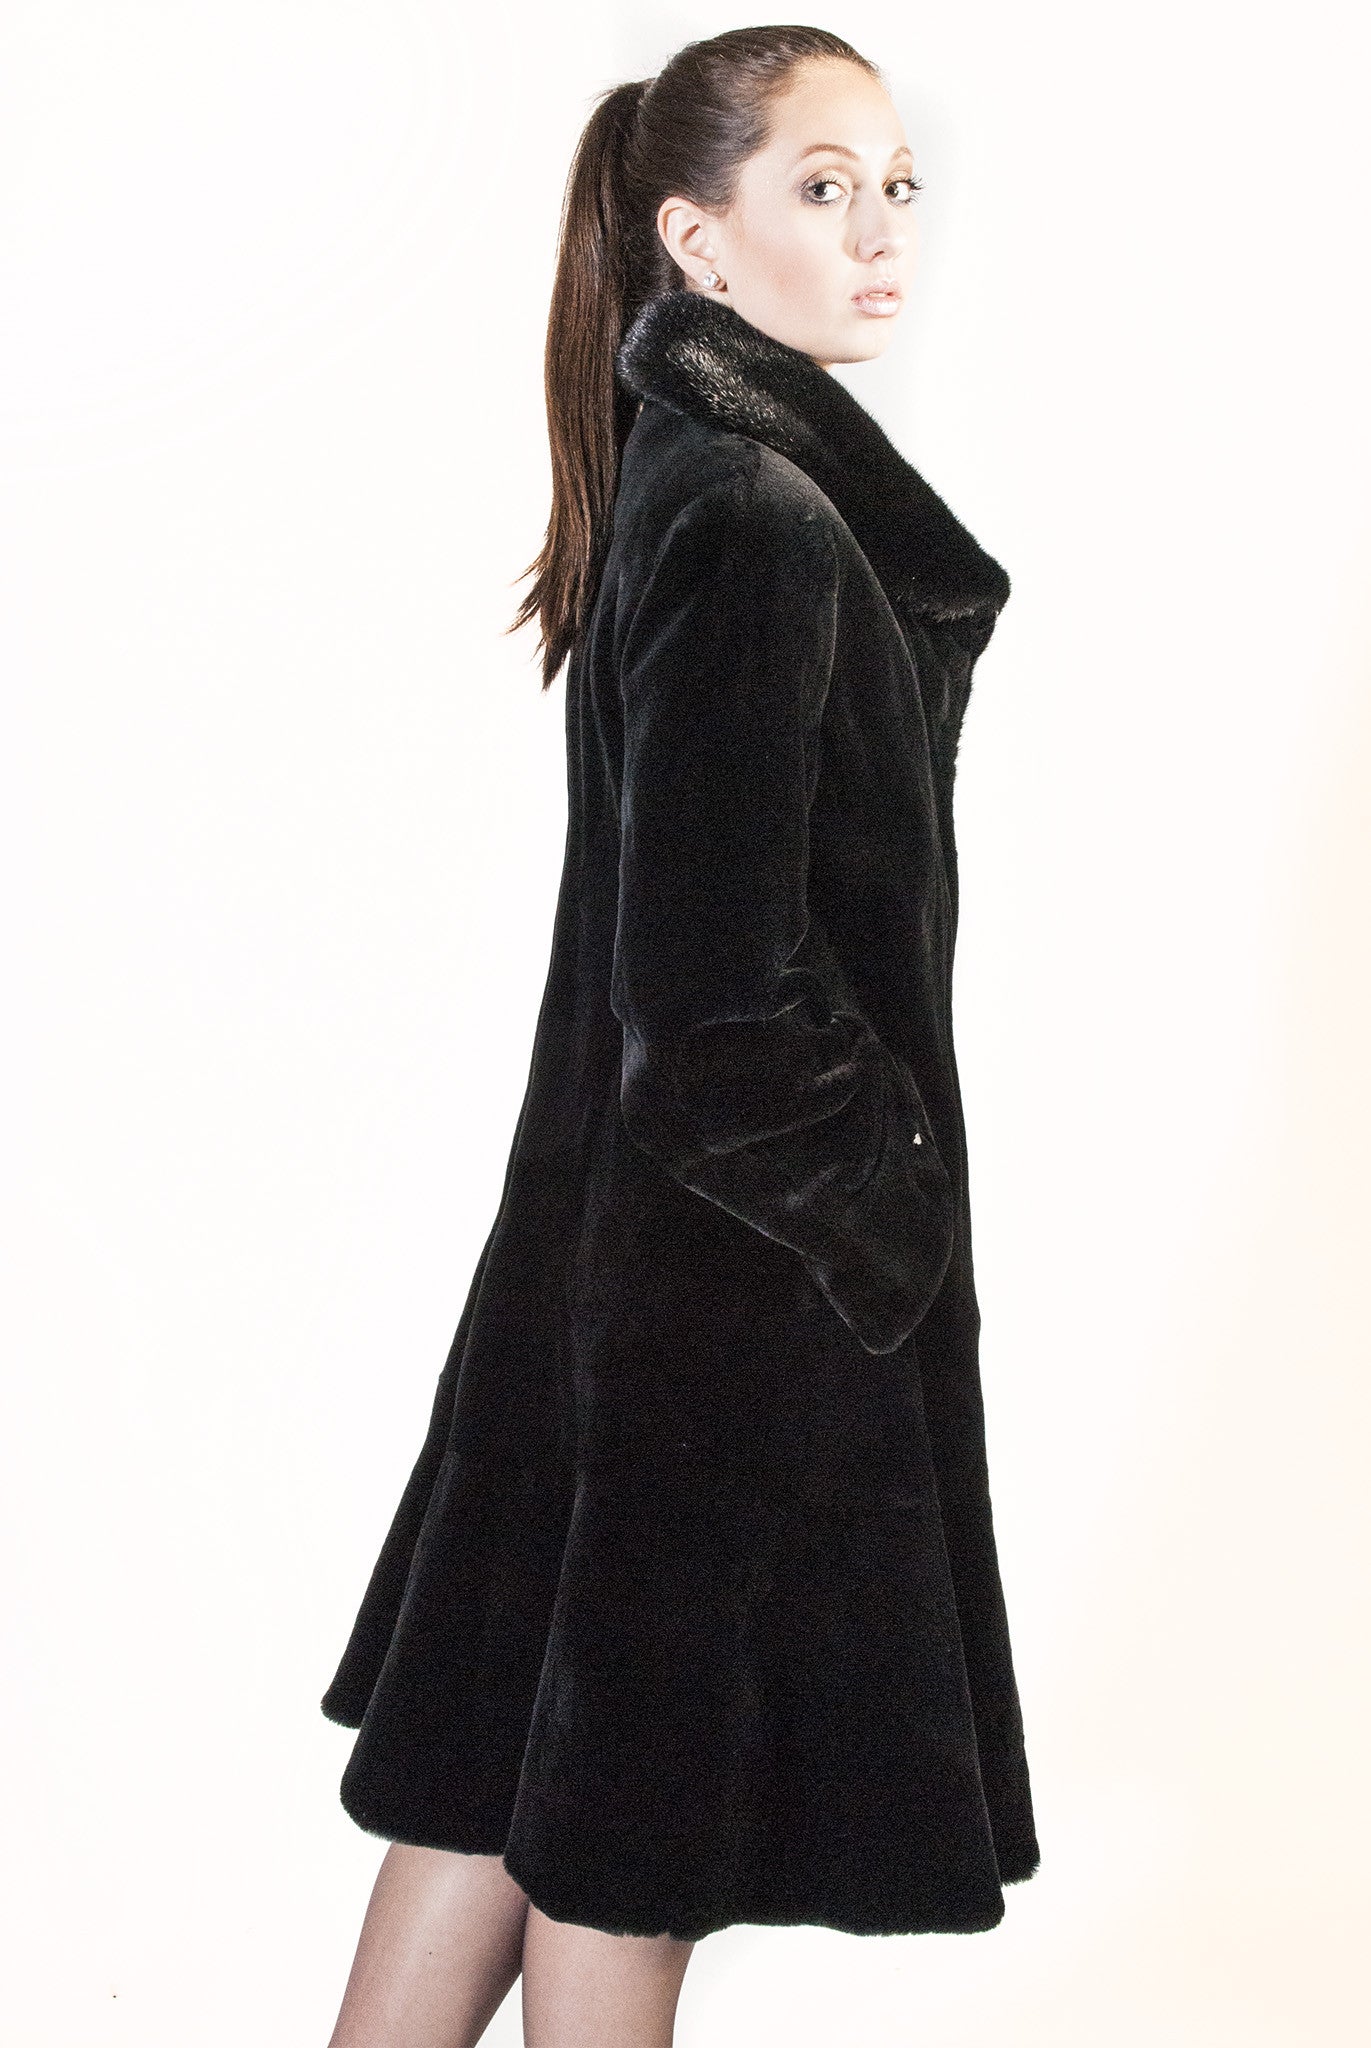 WEB SPECIAL     While supplies last ... Knee Length Swing Style Sheared Mink Coat - alexandros-furs